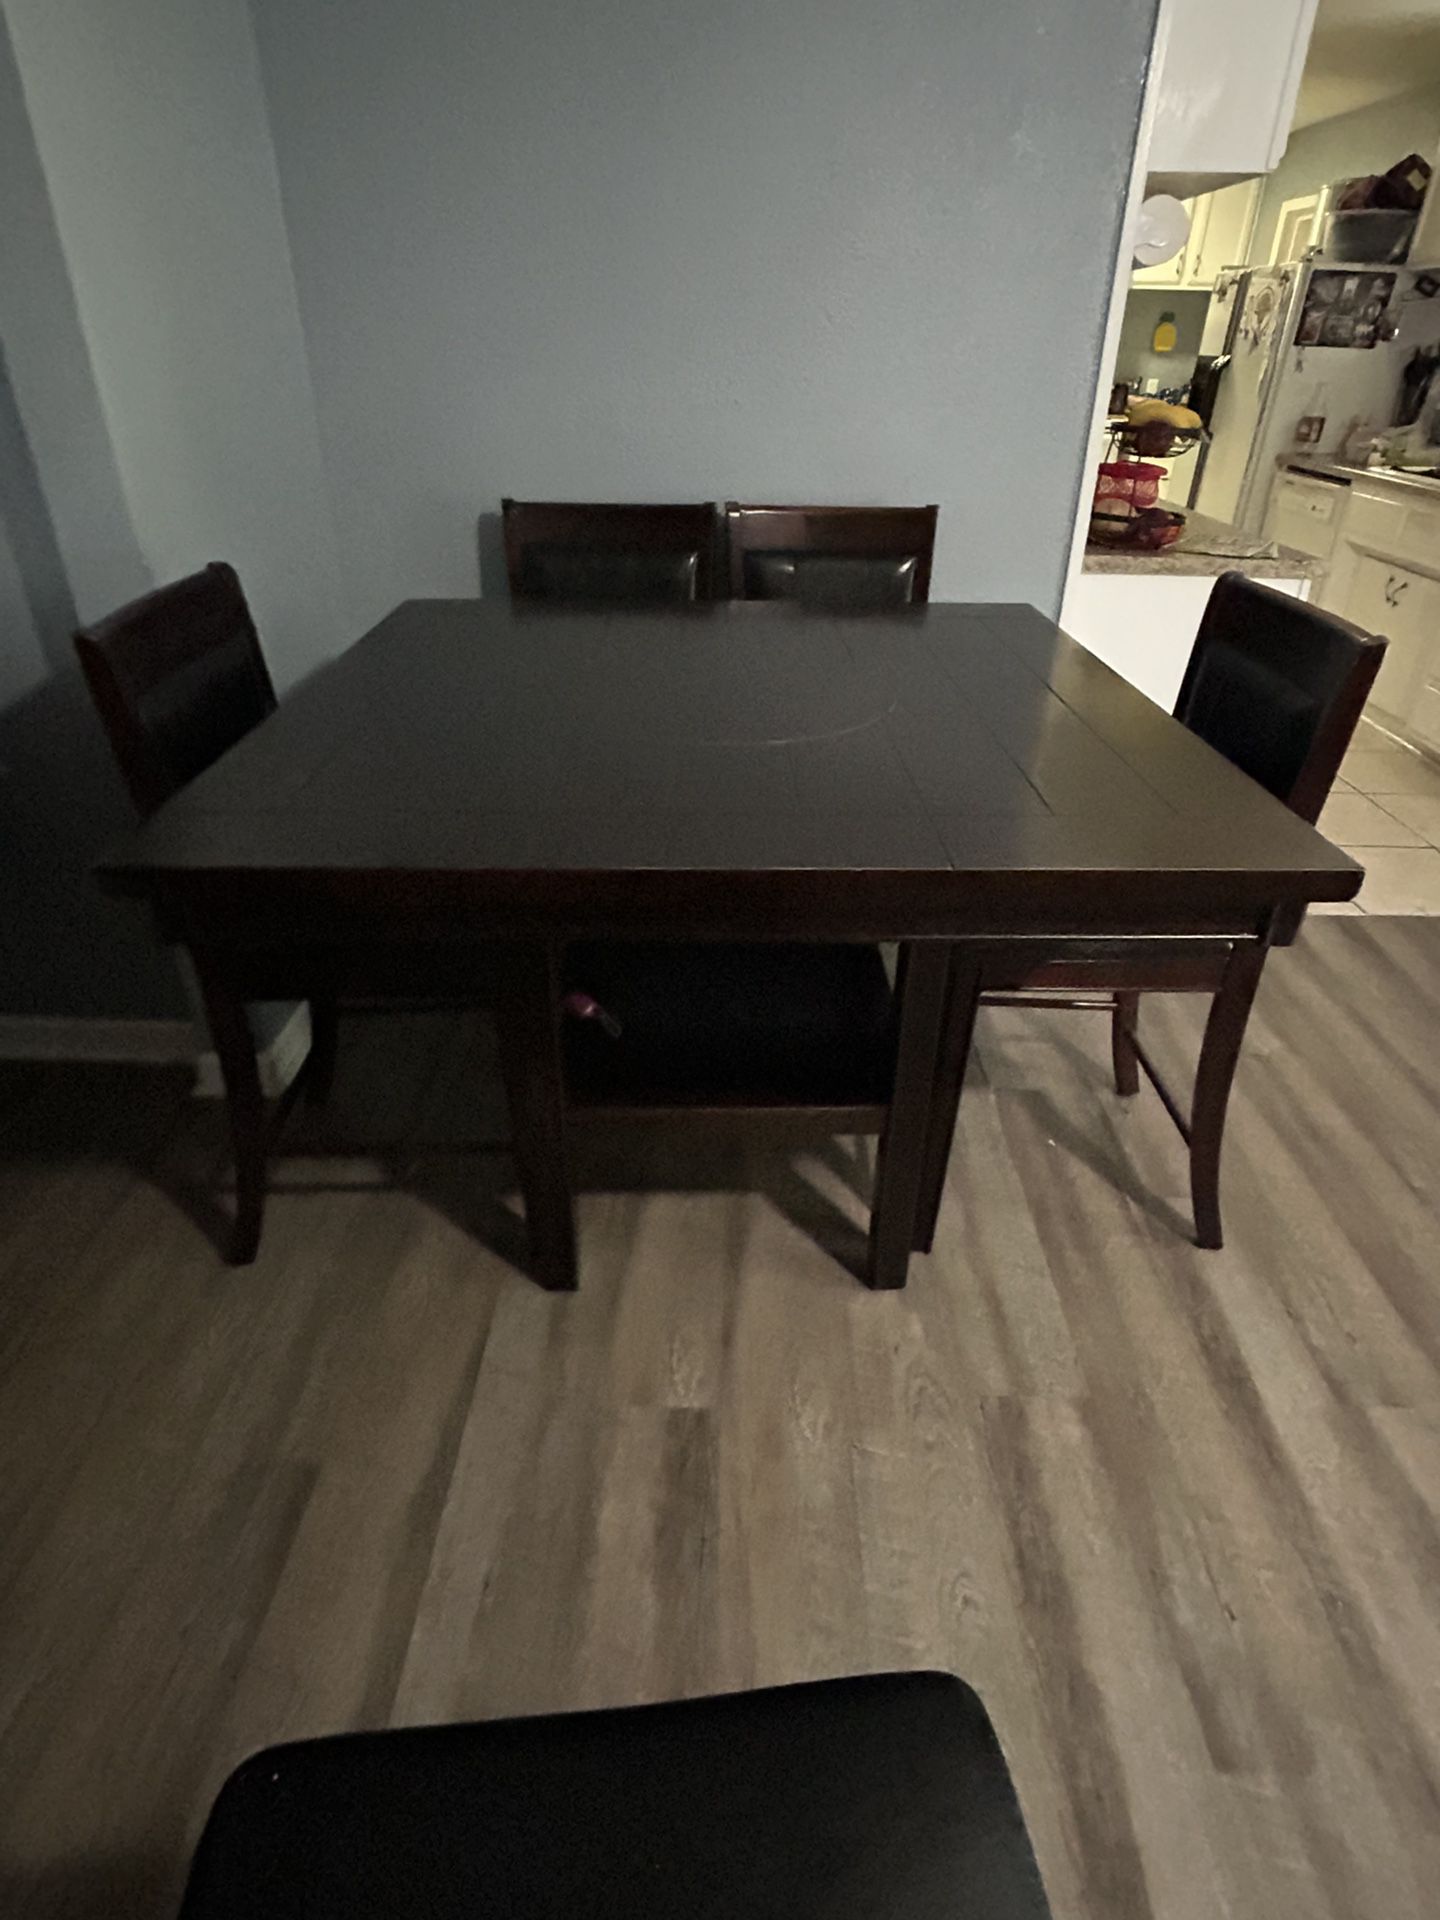 Table (4 Chair)